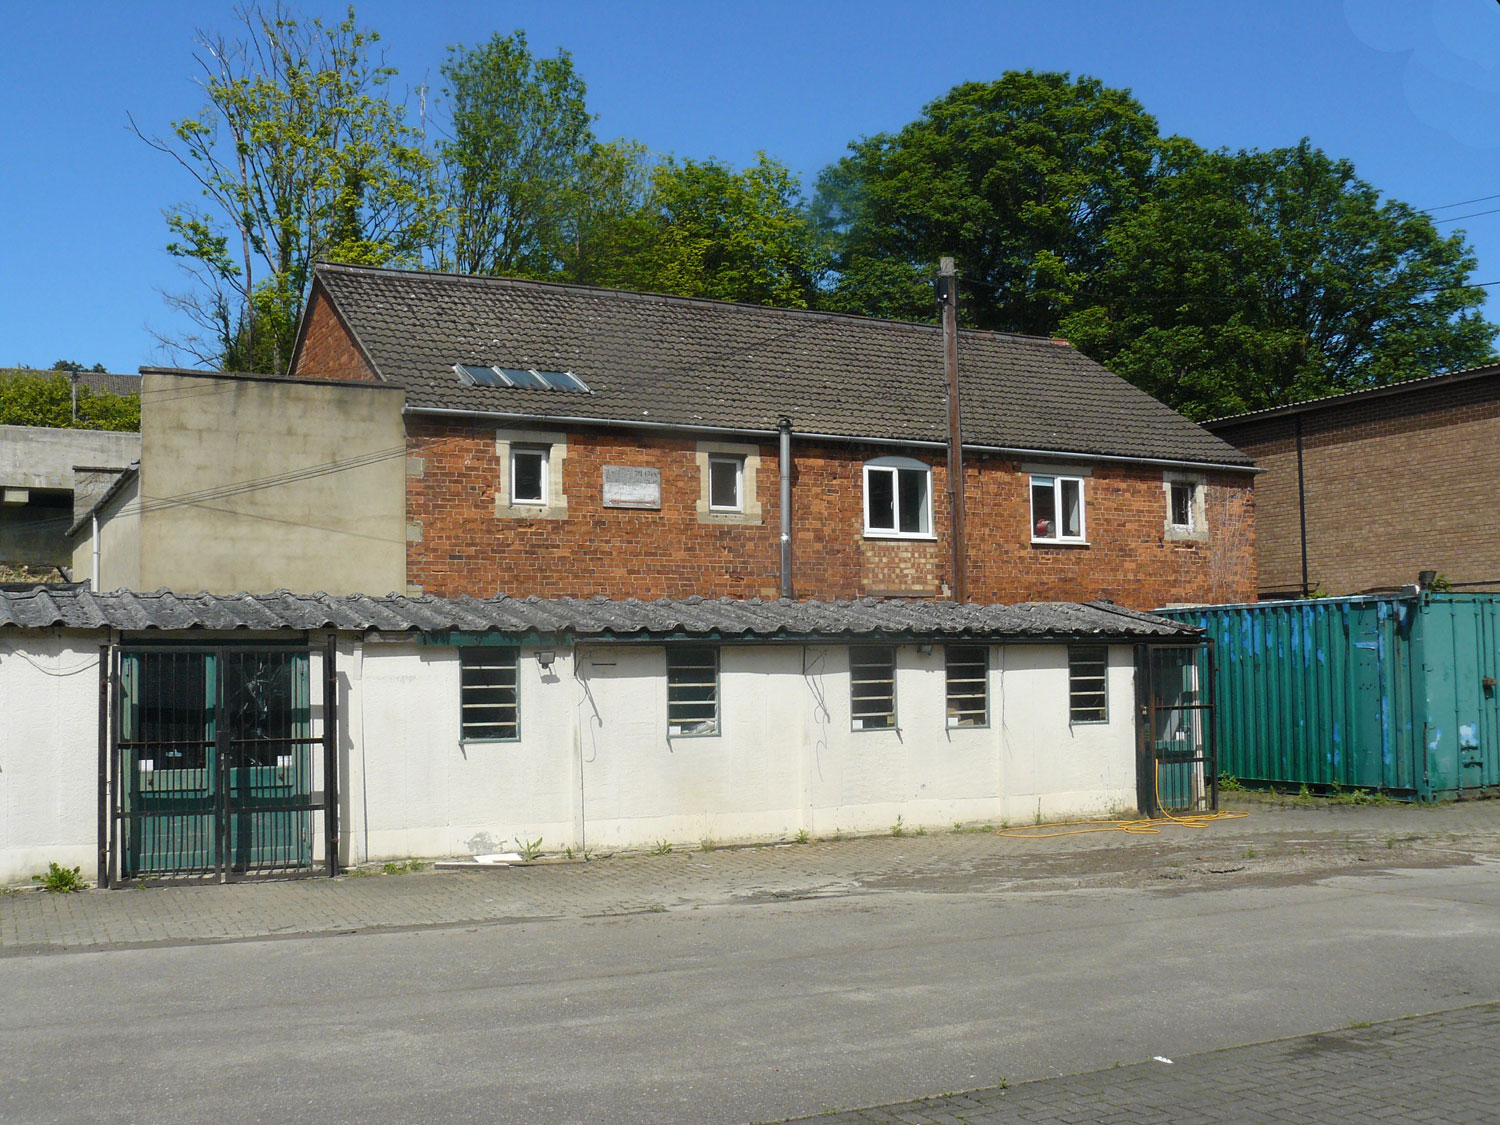 Wallbridge Warehouse with a modern extension in front.